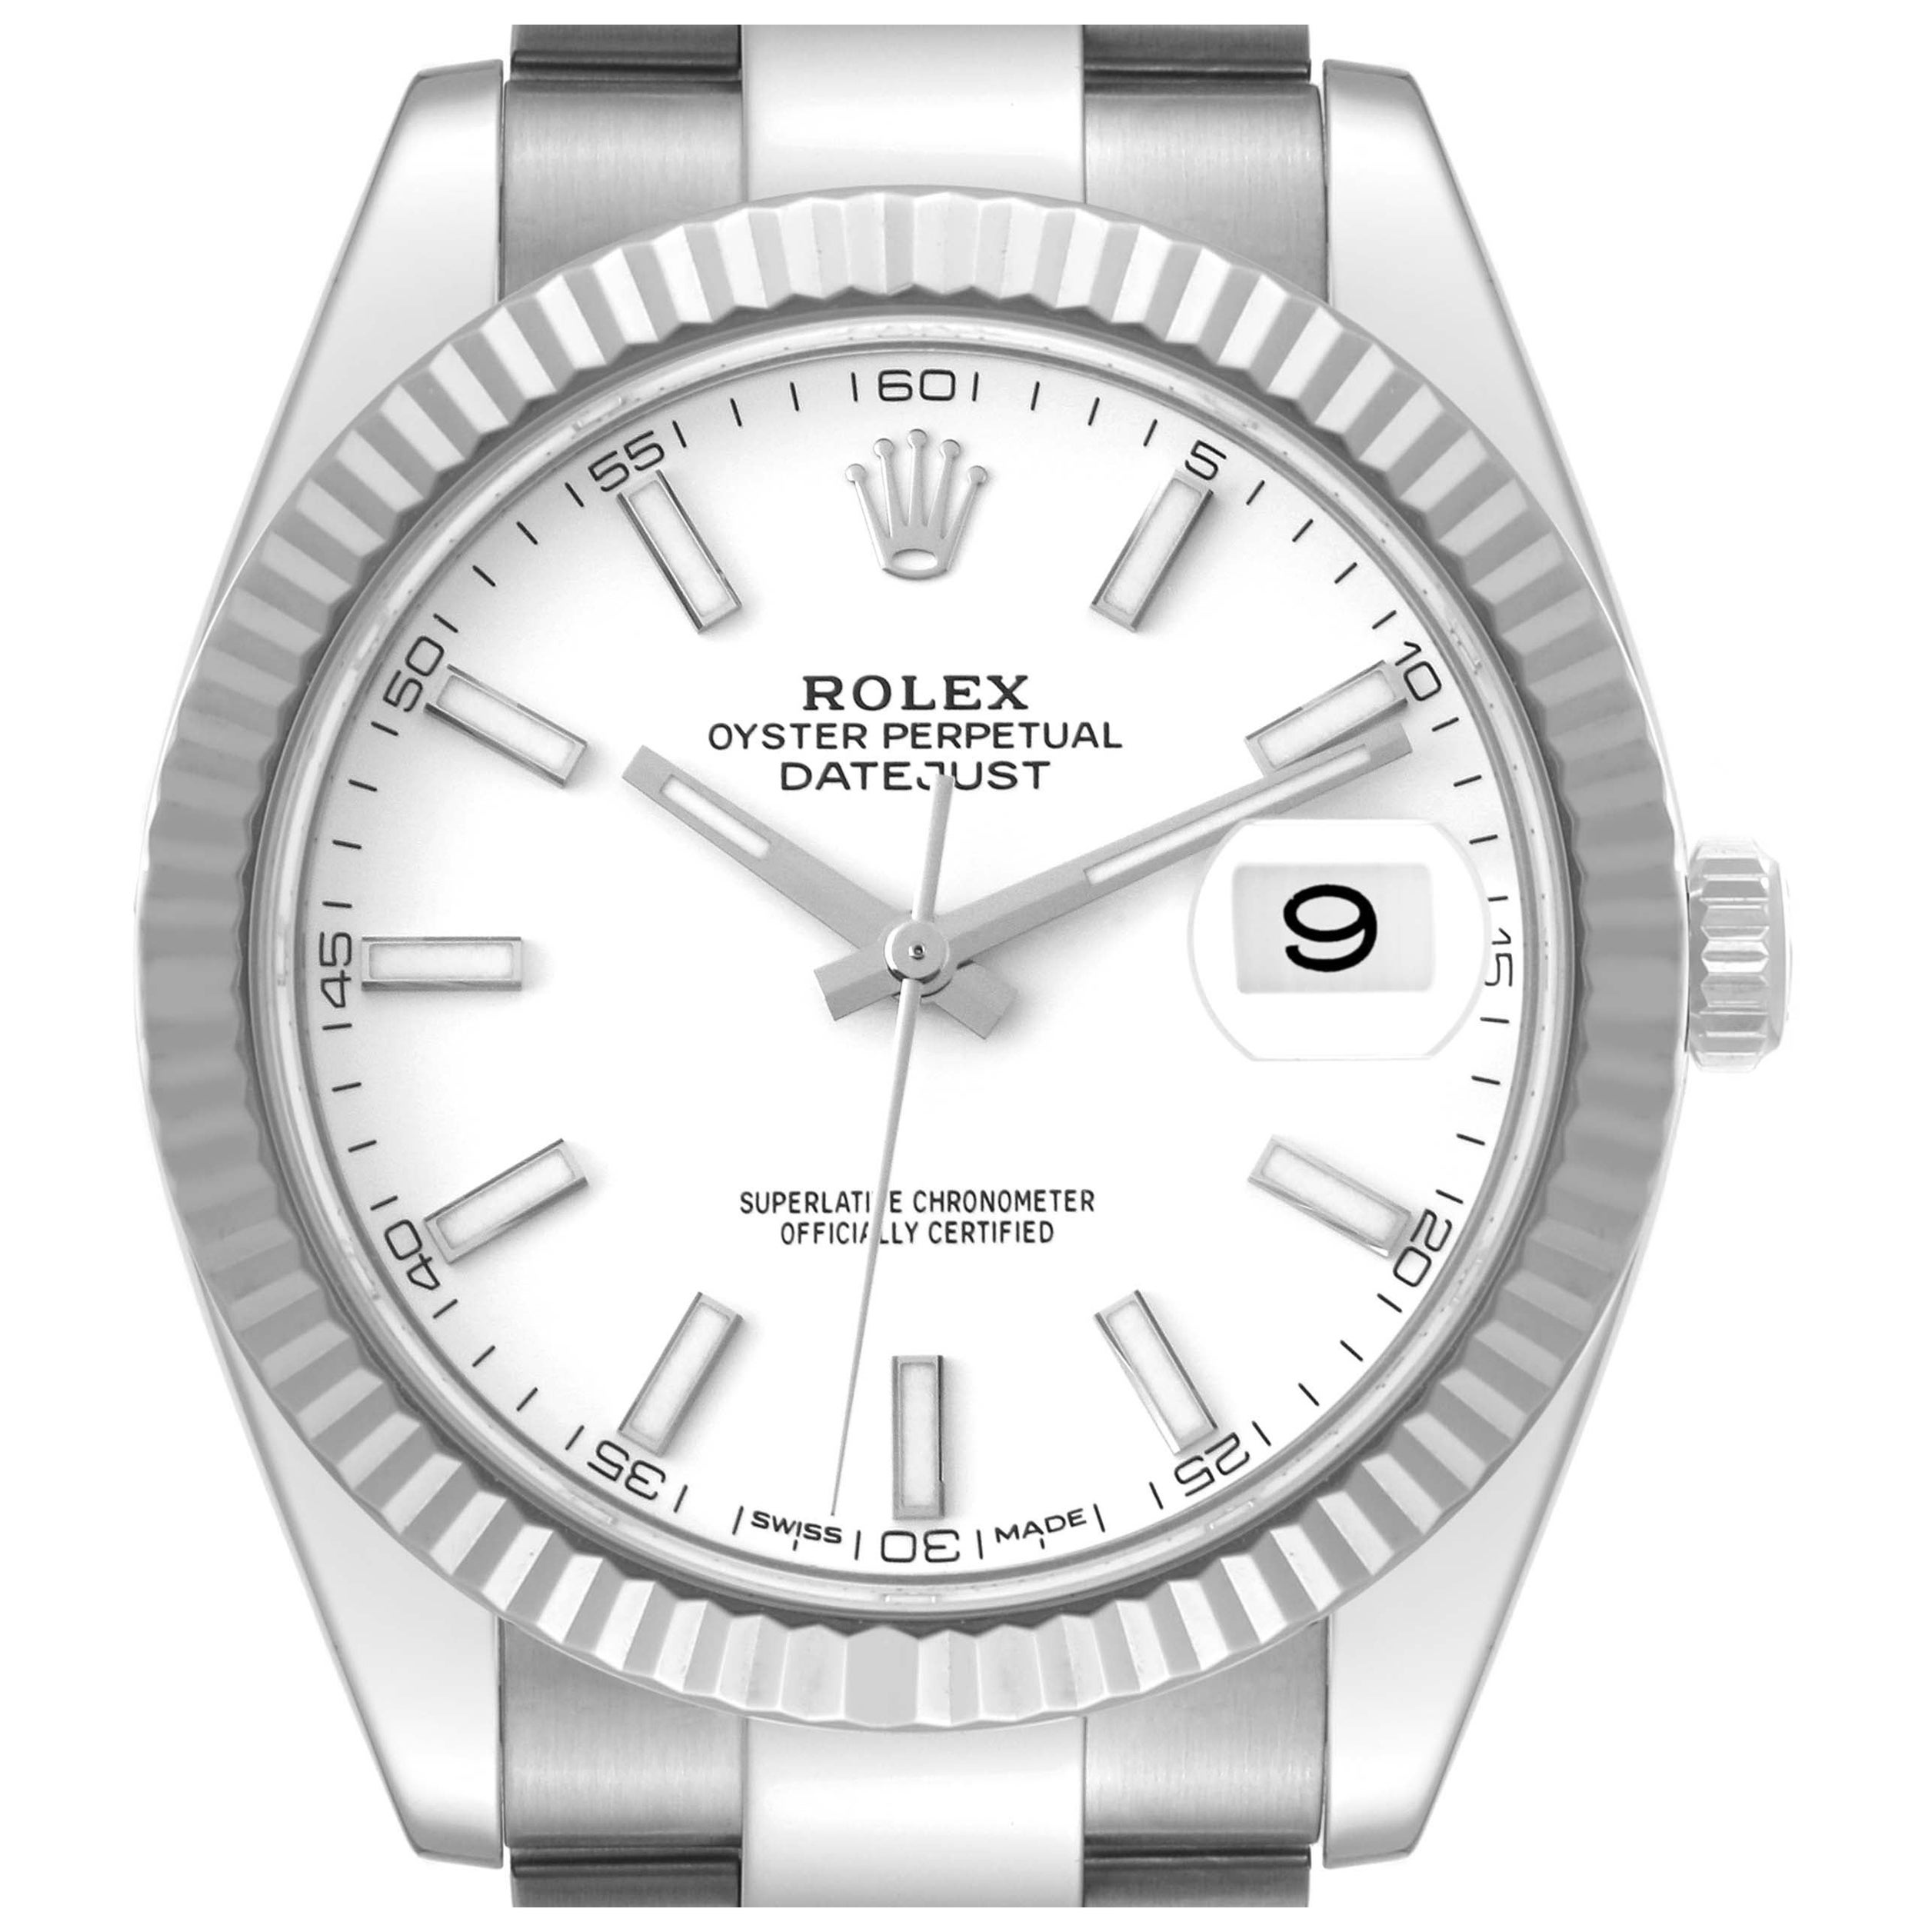 Rolex Datejust 41 Steel White Dial Oyster Bracelet Mens Watch 126334 Box Card